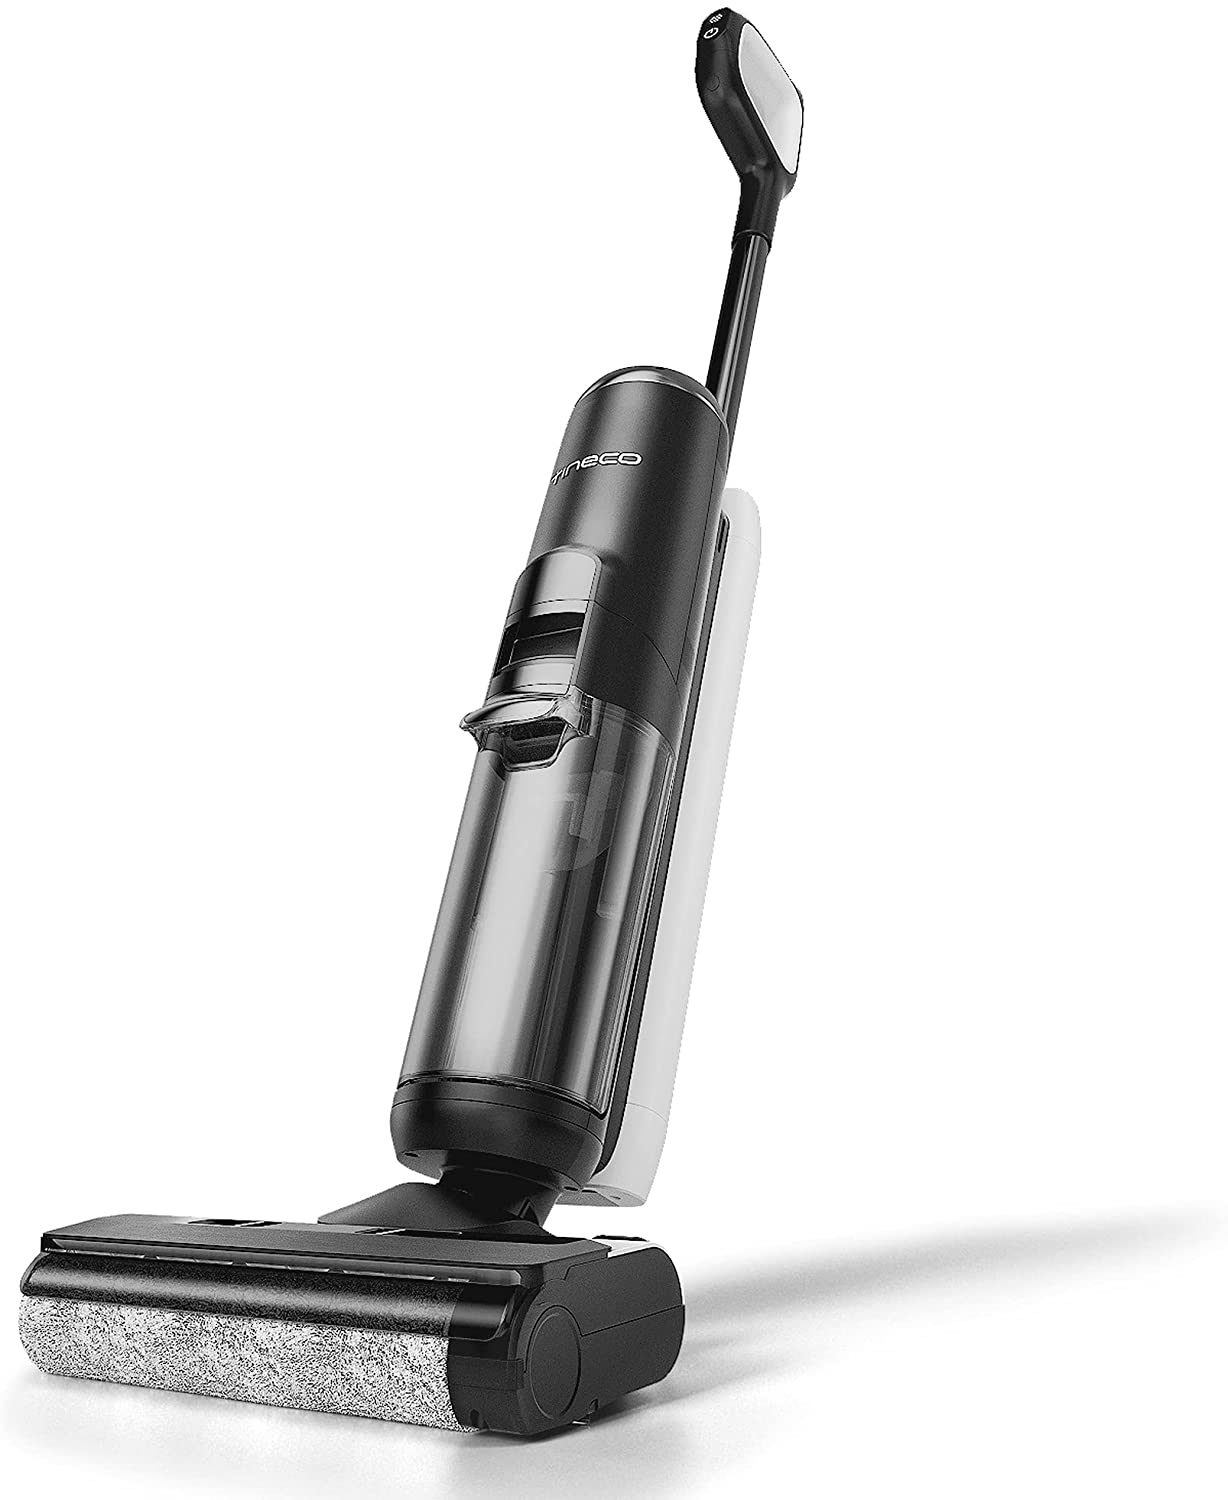 Tineco Floor One S5 Extreme Wet and Dry Cordless Floor Cleaner 3 in 1 - 220W 0,8L - TINECO 3.01.01.01.002